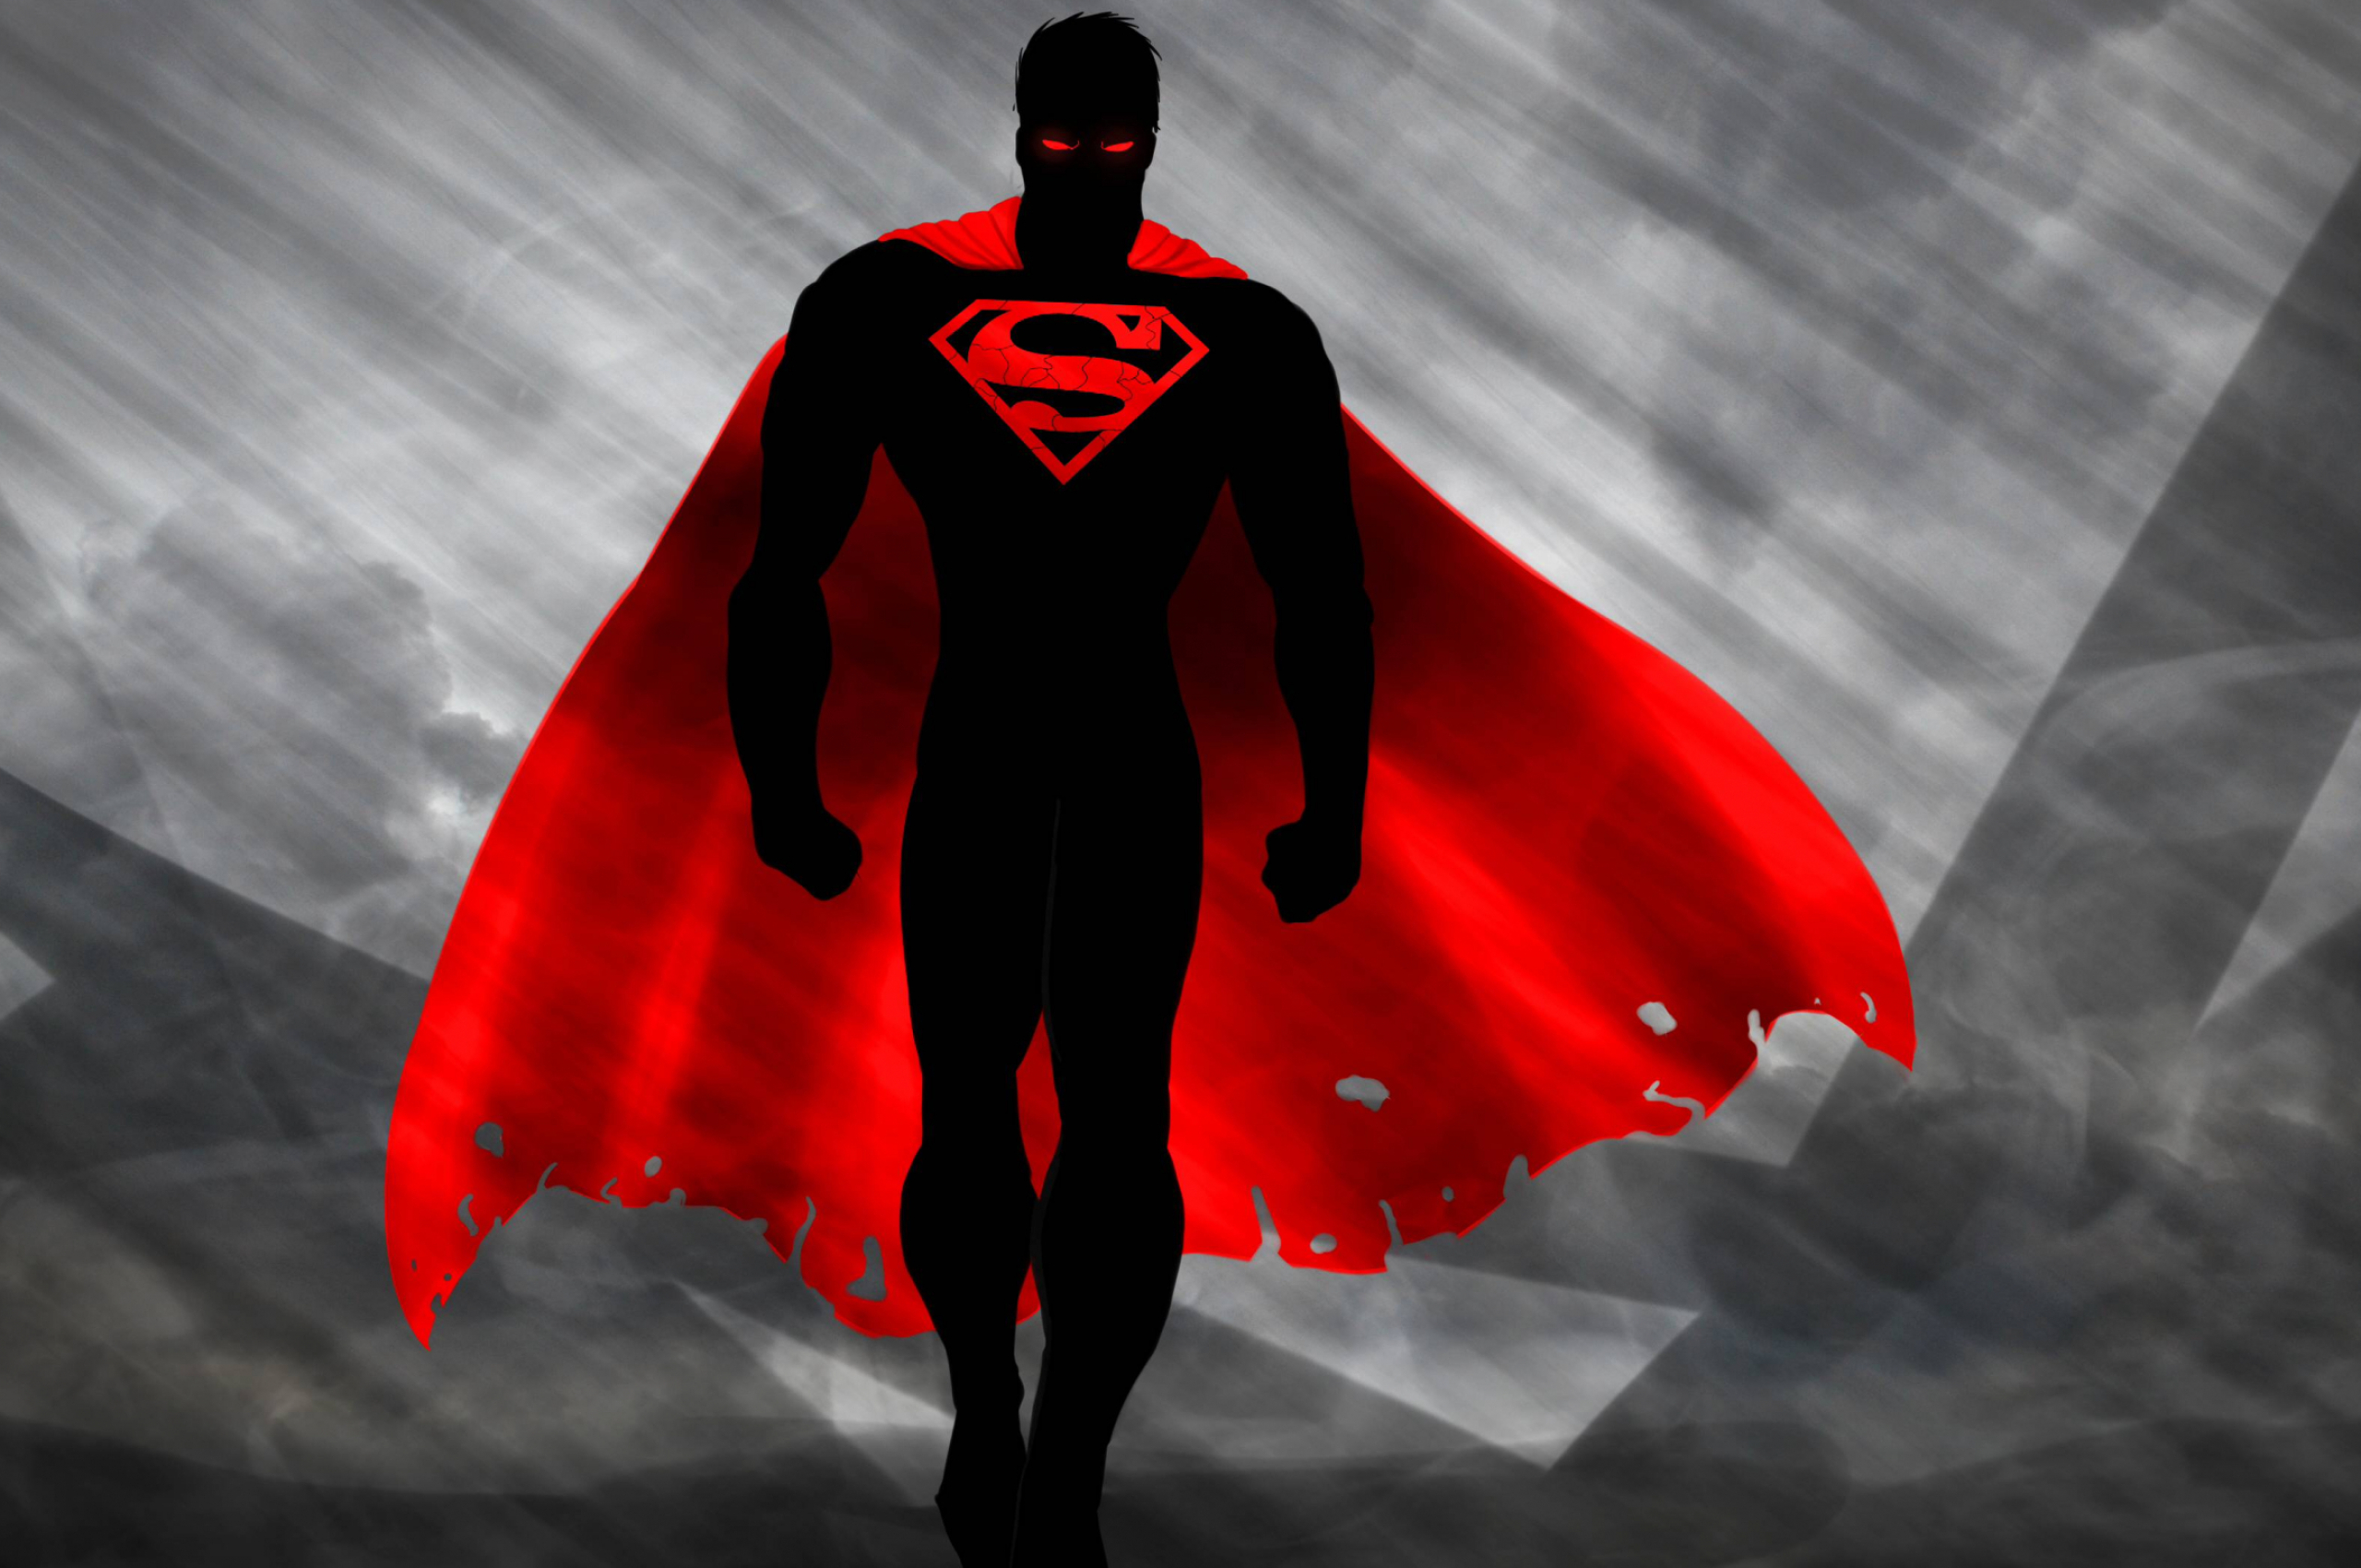 2560x1700 Free download Superman Cool Wallpapers Group 82 [3507x2480] for your Desktop, Mobile \u0026 Tablet | Explore 22+ Superman PC Wallpapers | Superman Wallpapers, Superman Wallpaper, Superman Background